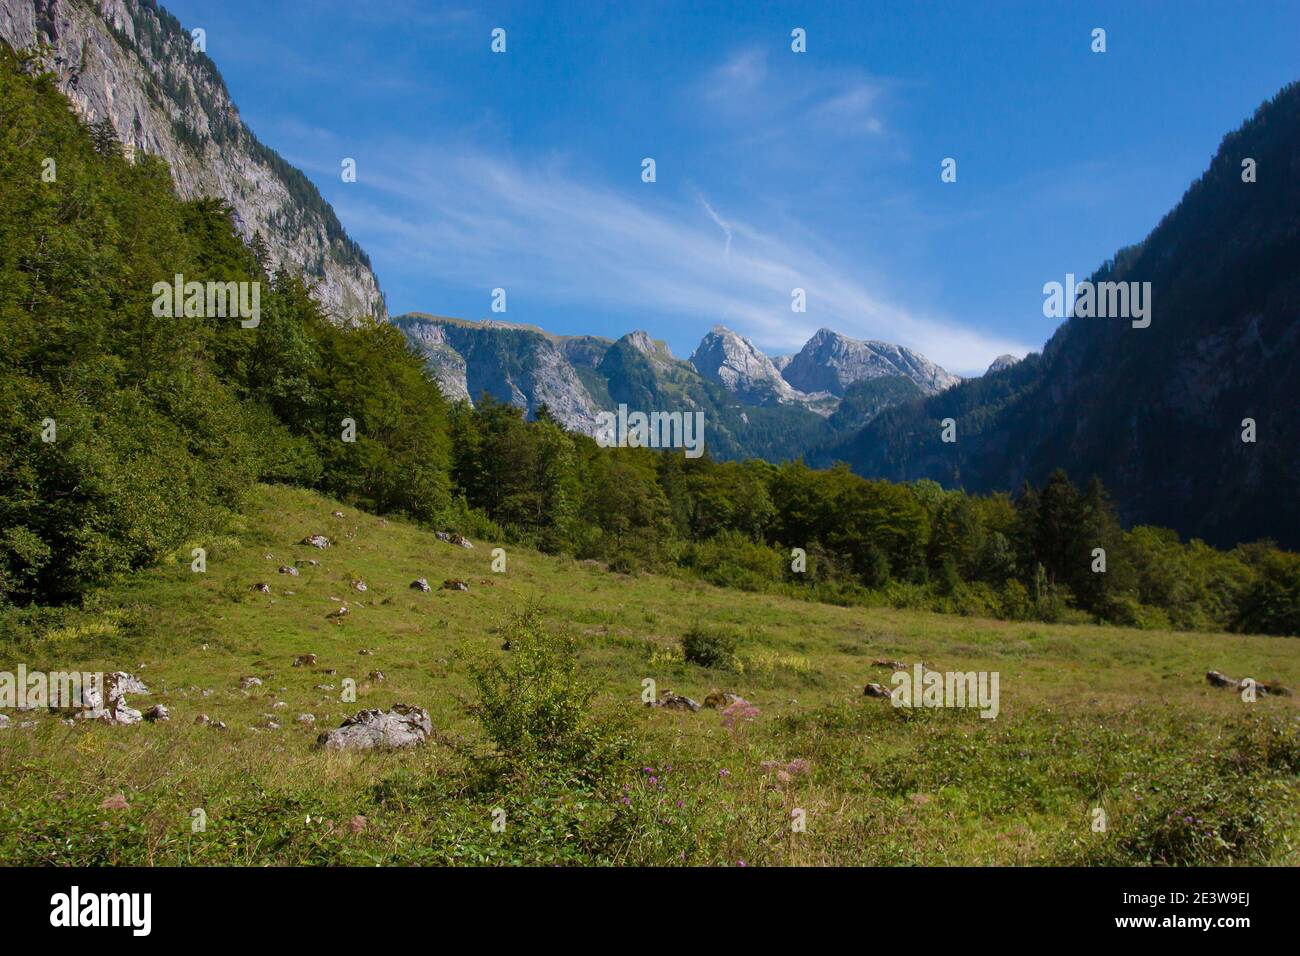 Nice view of the mittersee, alpine green meadows, beautiful landscape for your desktop Stock Photo